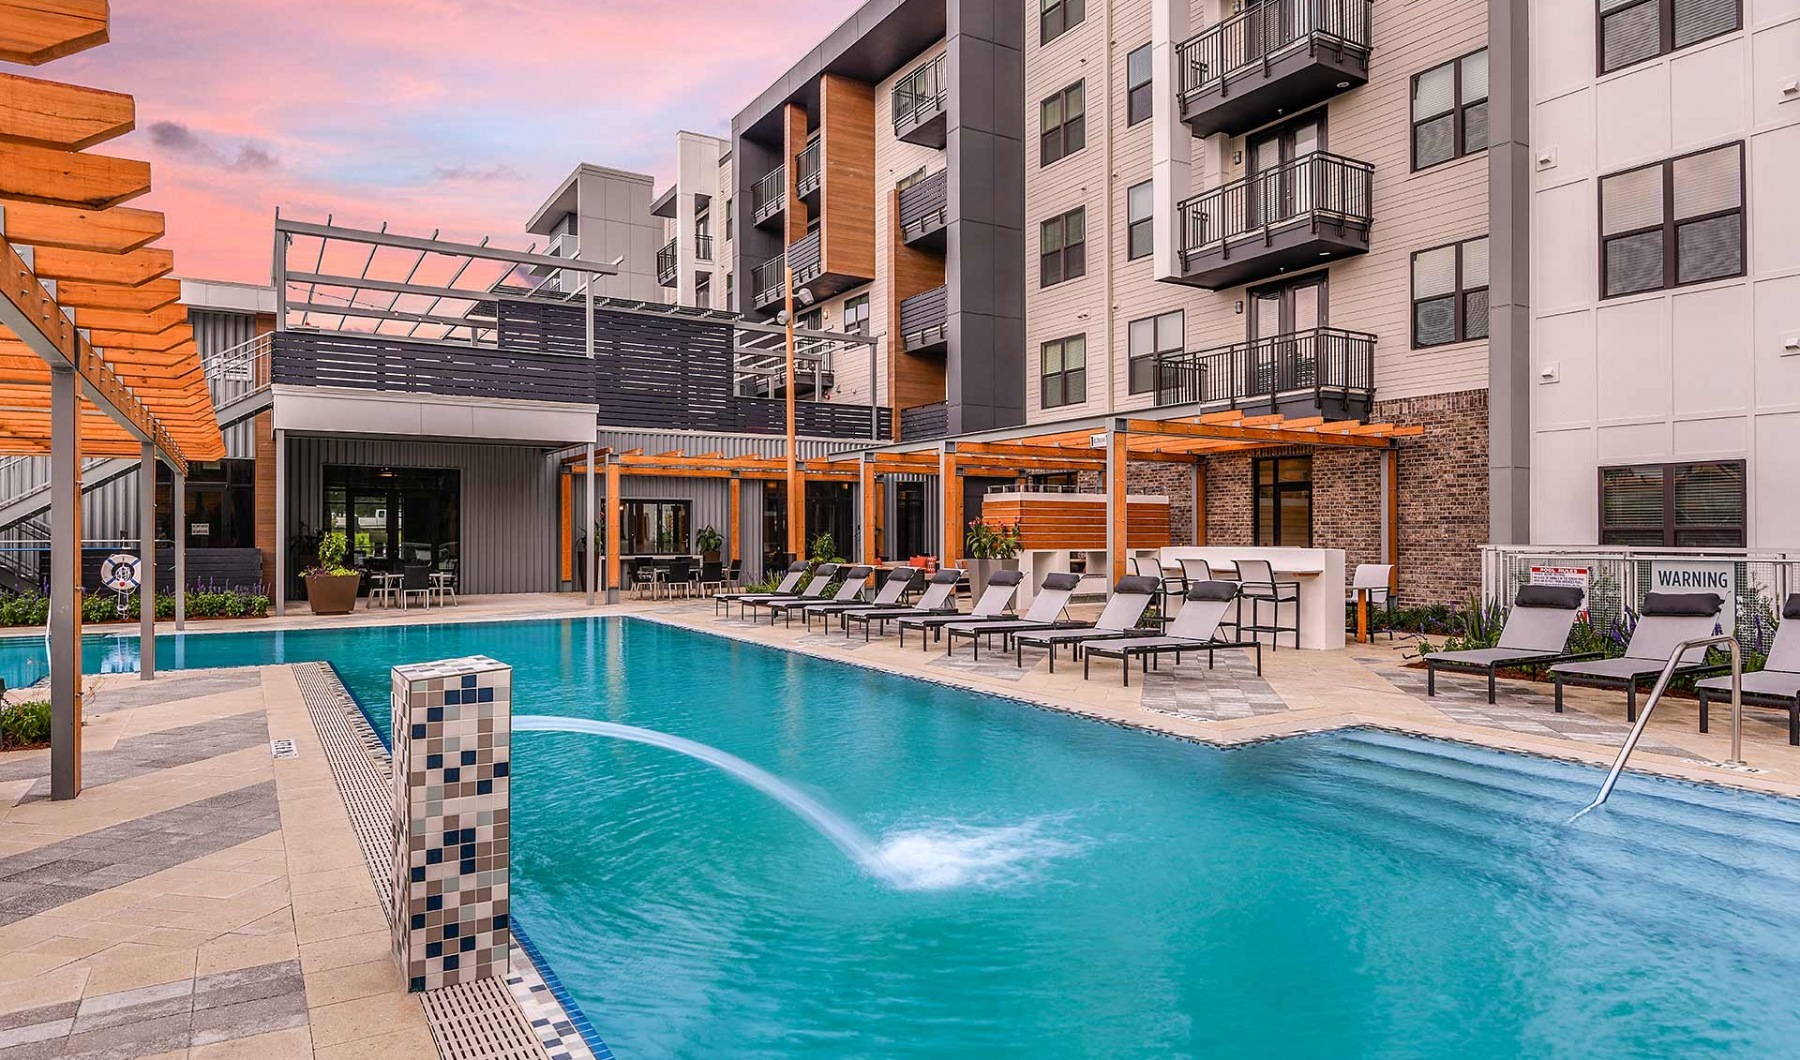 The pool area at JTB Apartments.